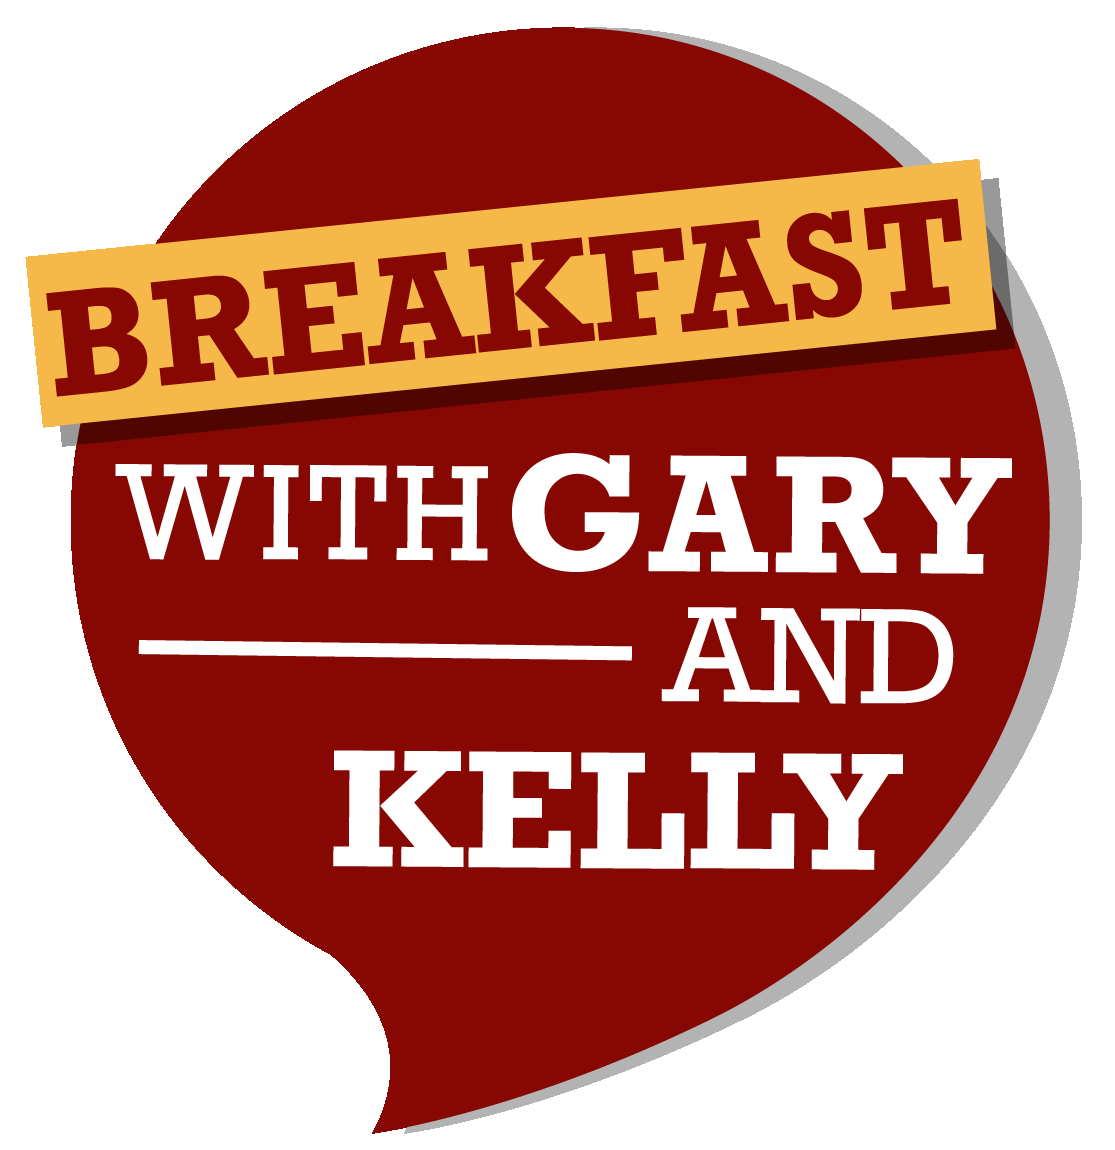 For more information on the Breakfast with Gary and Kelly Radio show, the LIVE with Gary and Kelly TV series or how to become part of the live studio audience April 15 show, visit